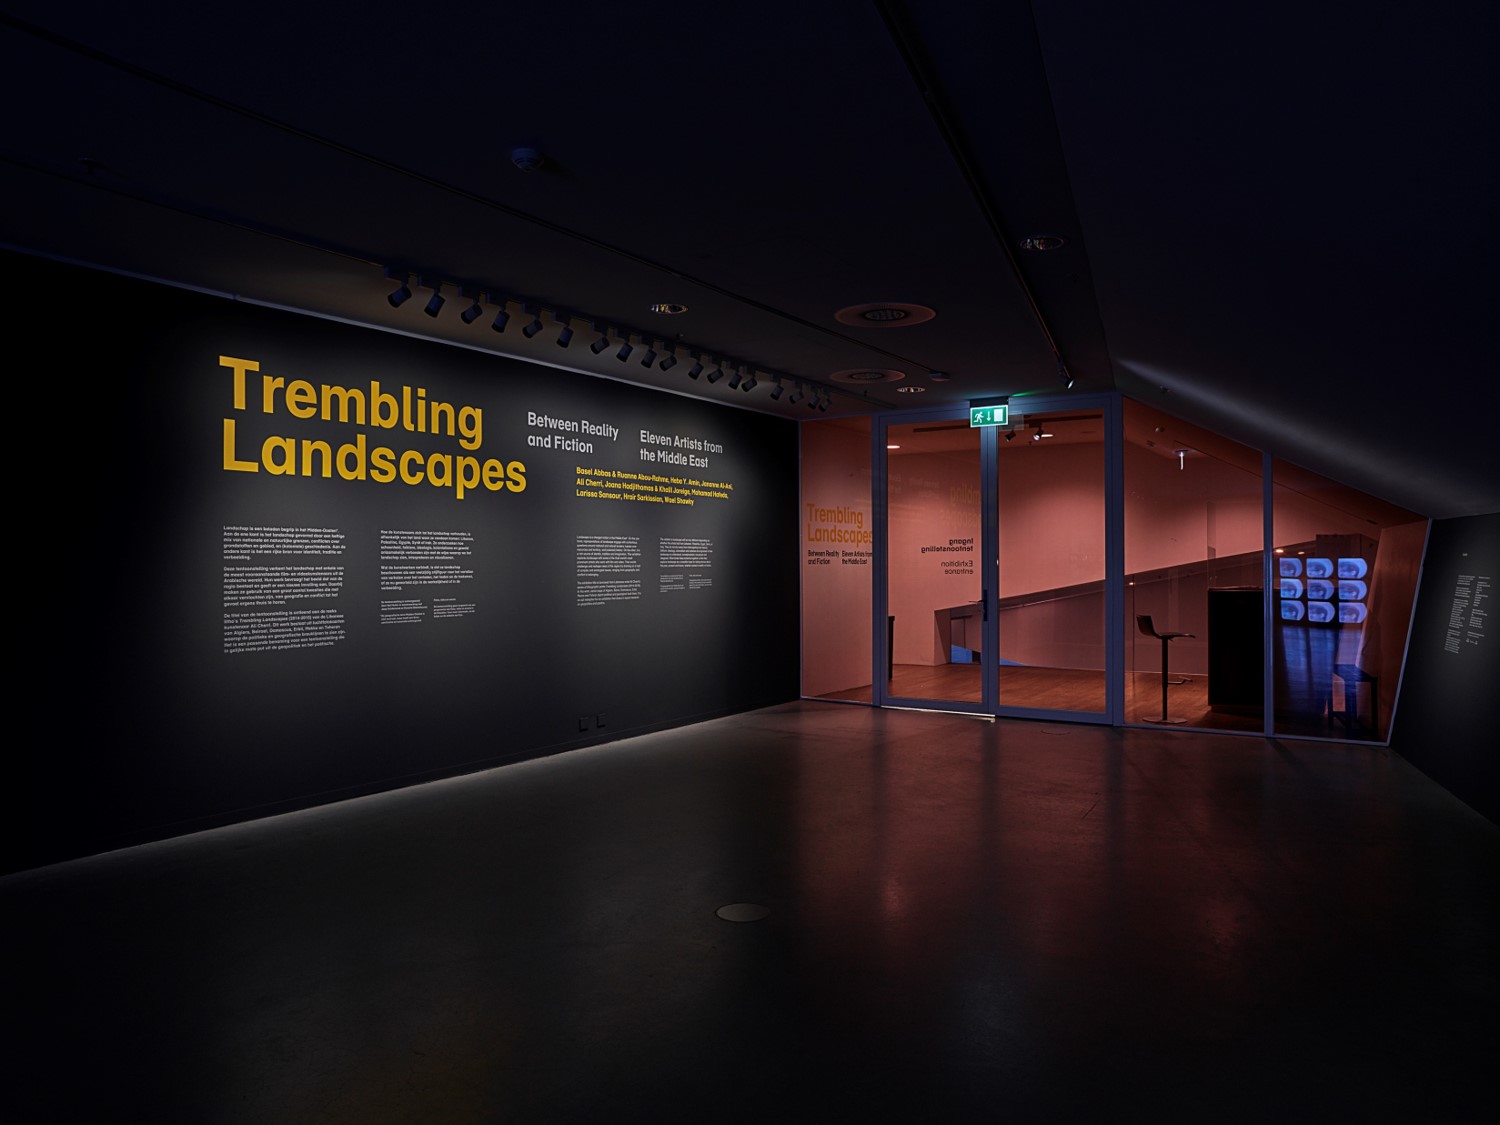 Full Virtual Tour of ‘Trembling Landscapes’ Exhibition is now available to watch!